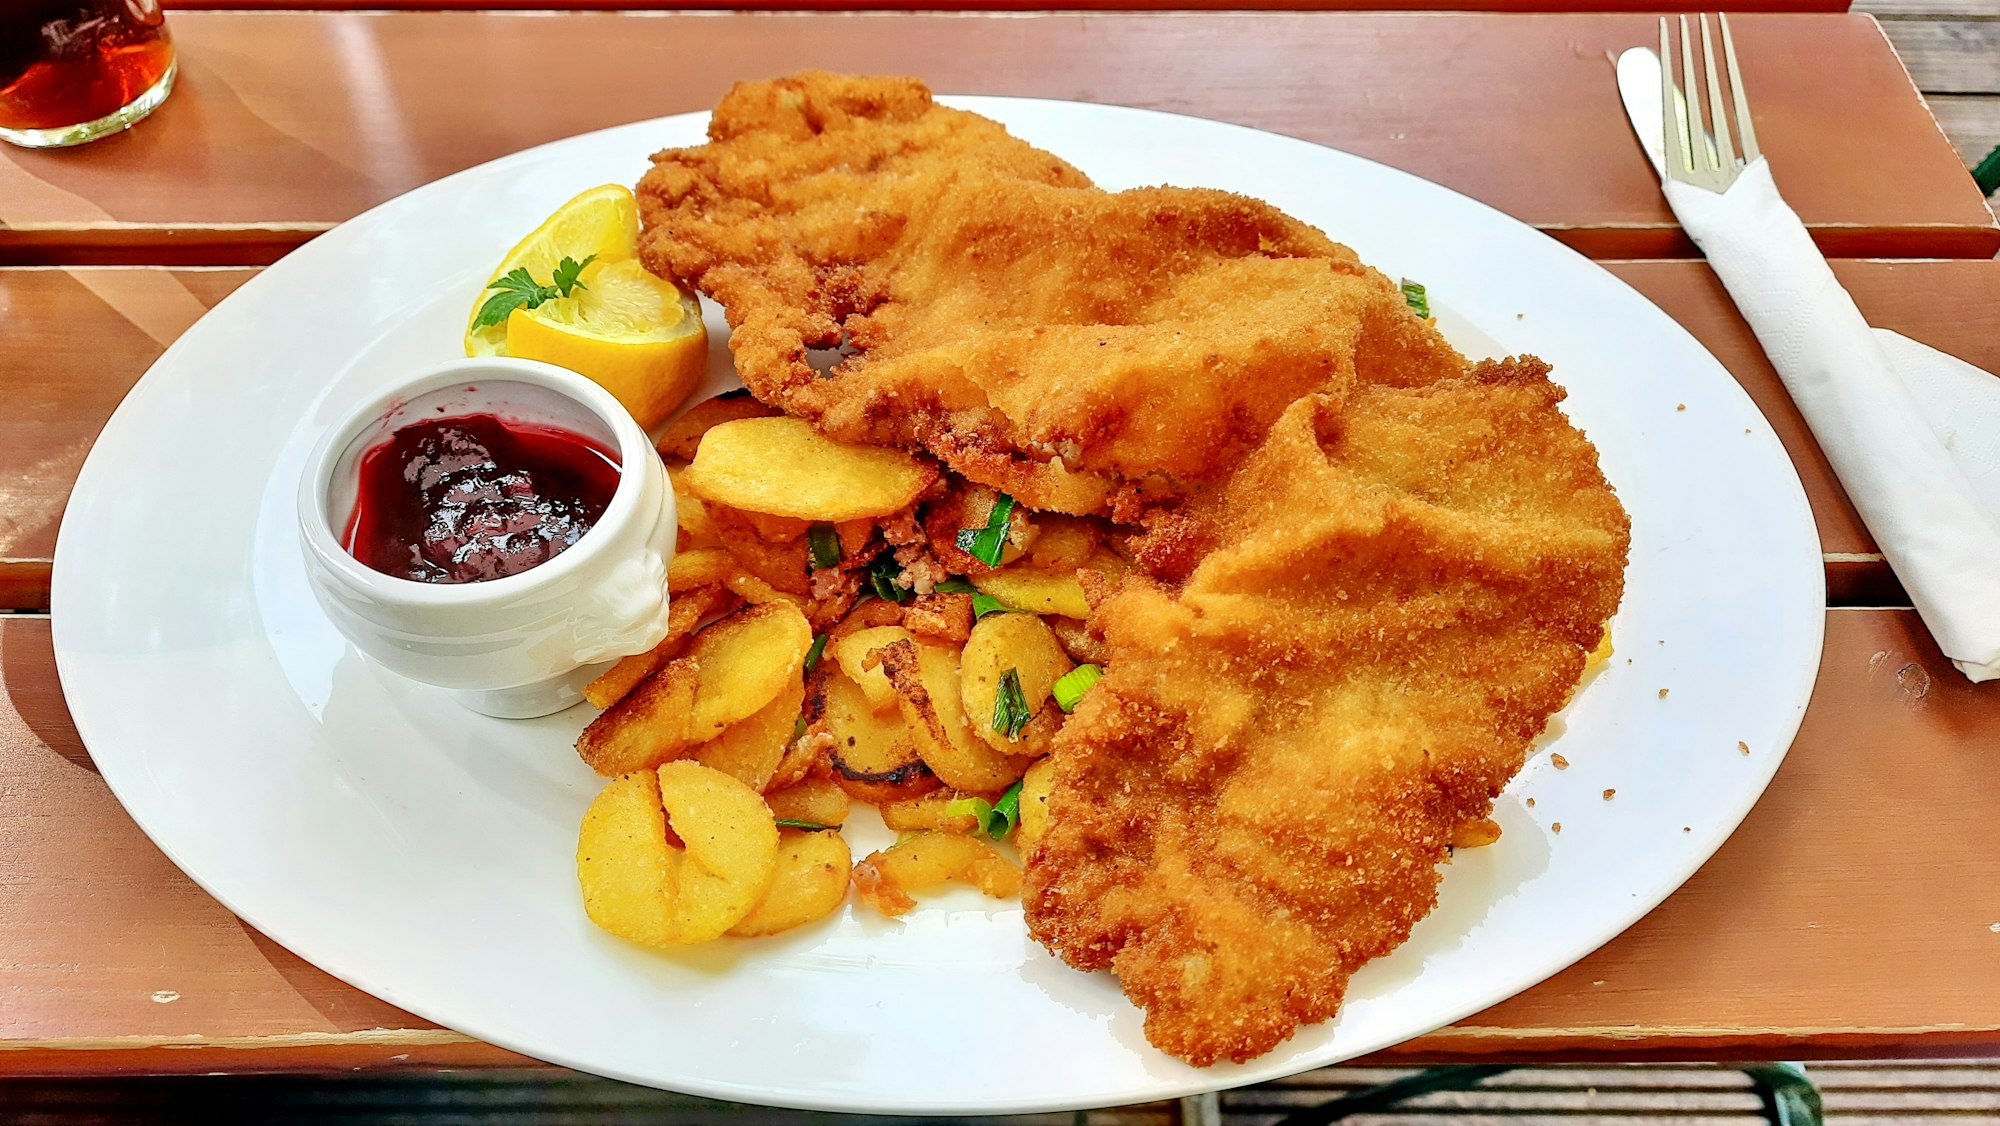 A famous Wiener Schnitzel made from veal escalope, always served with lemon, sometimes with berry sauce. Take care:Schnitzel Wiener Art is in most cases not the same. "Guten Appetit" (enjoy your meal).
| Picture made and Schnitzel eaten at restaurant Zollpackhof, Berlin.